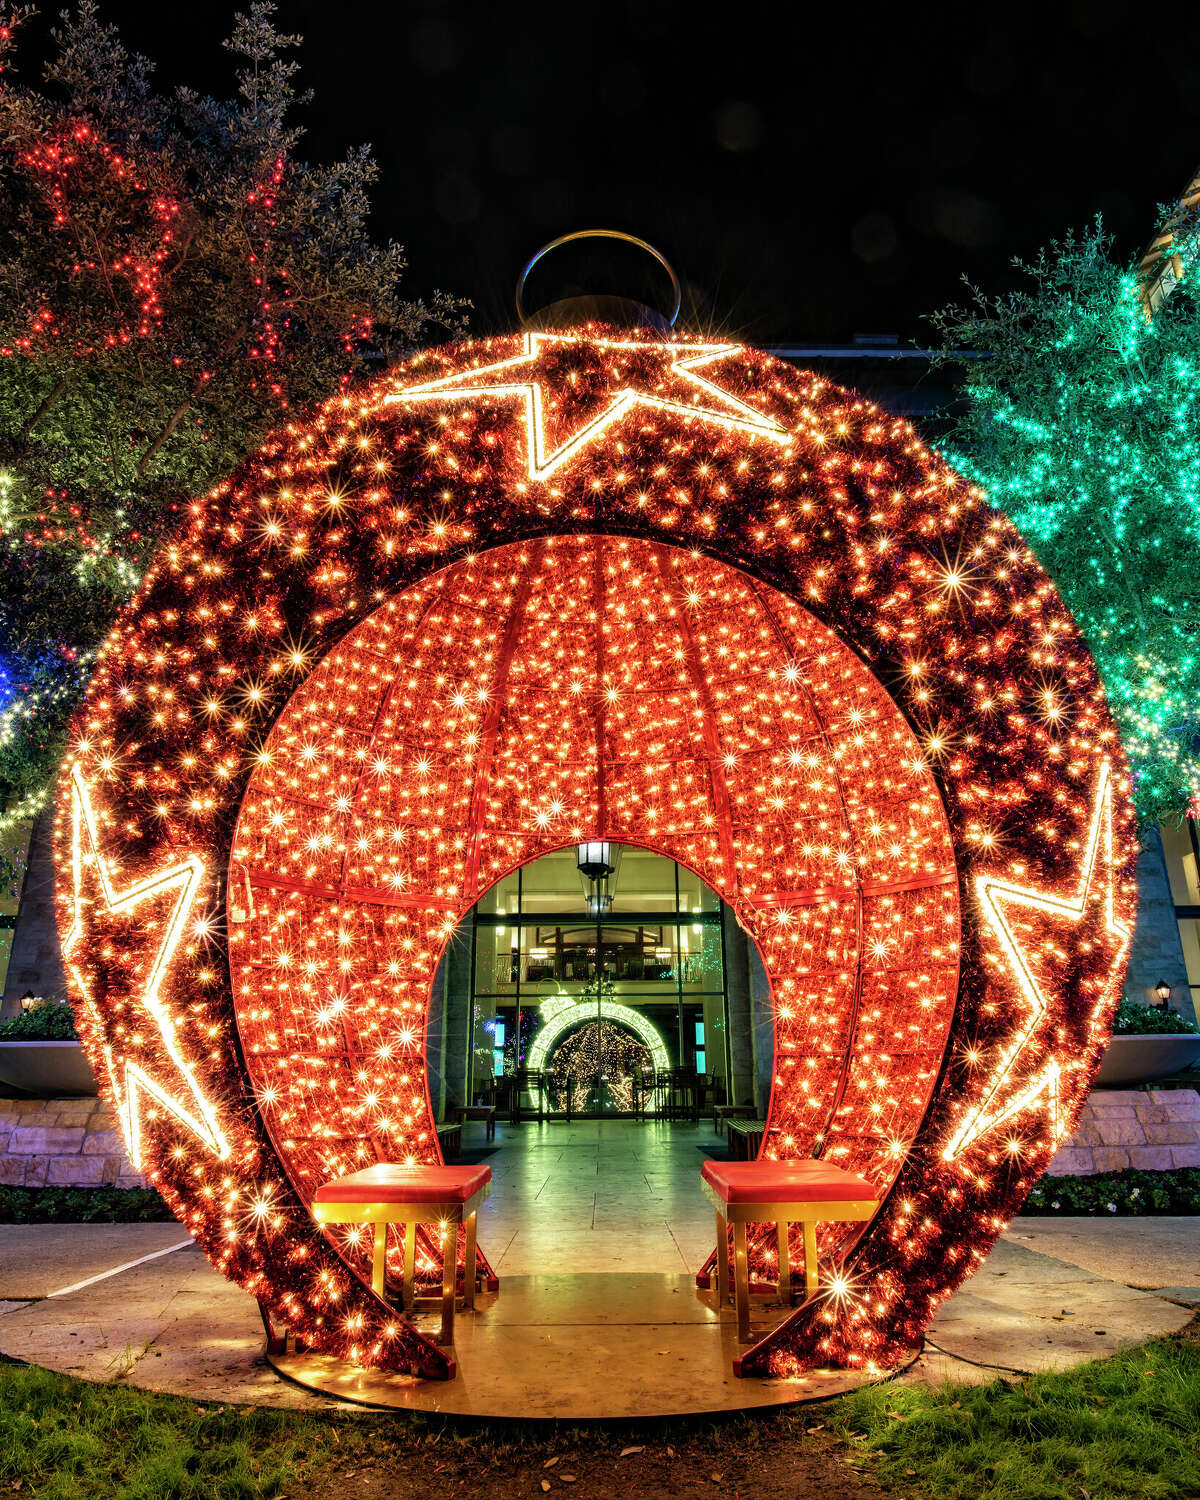 This Texas resort transforms into a Christmas wonderland, with live